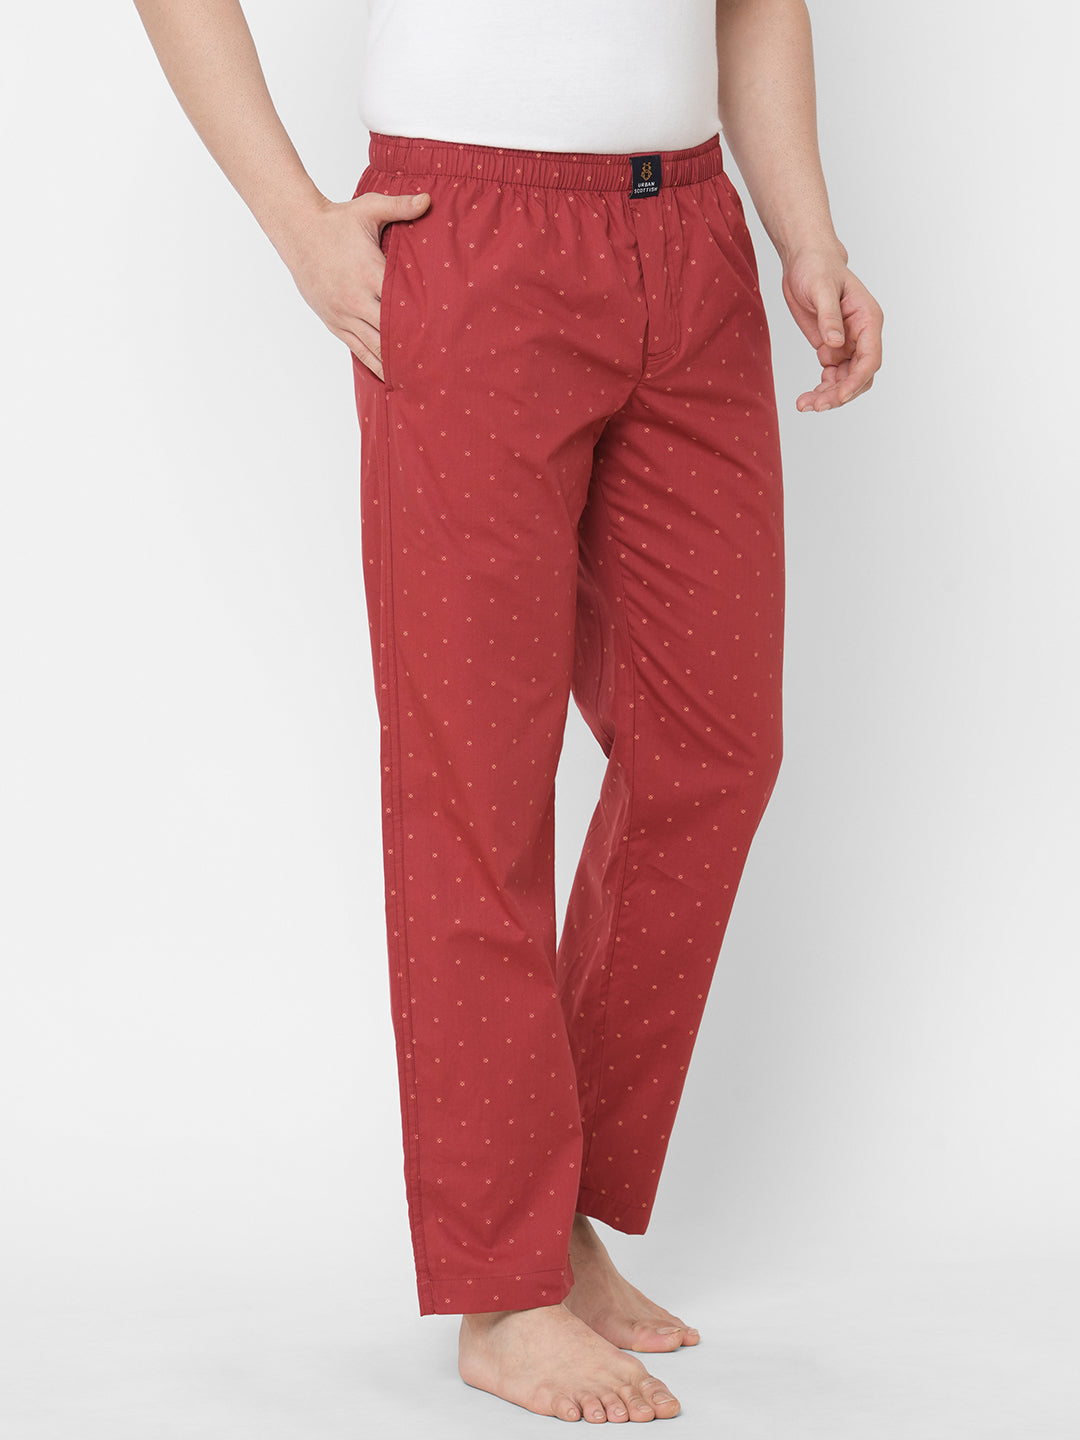 Women's Printed, Maroon, Cotton, Regular Fit, Elasticated, Waistband, Pyjama  With Side Pockets